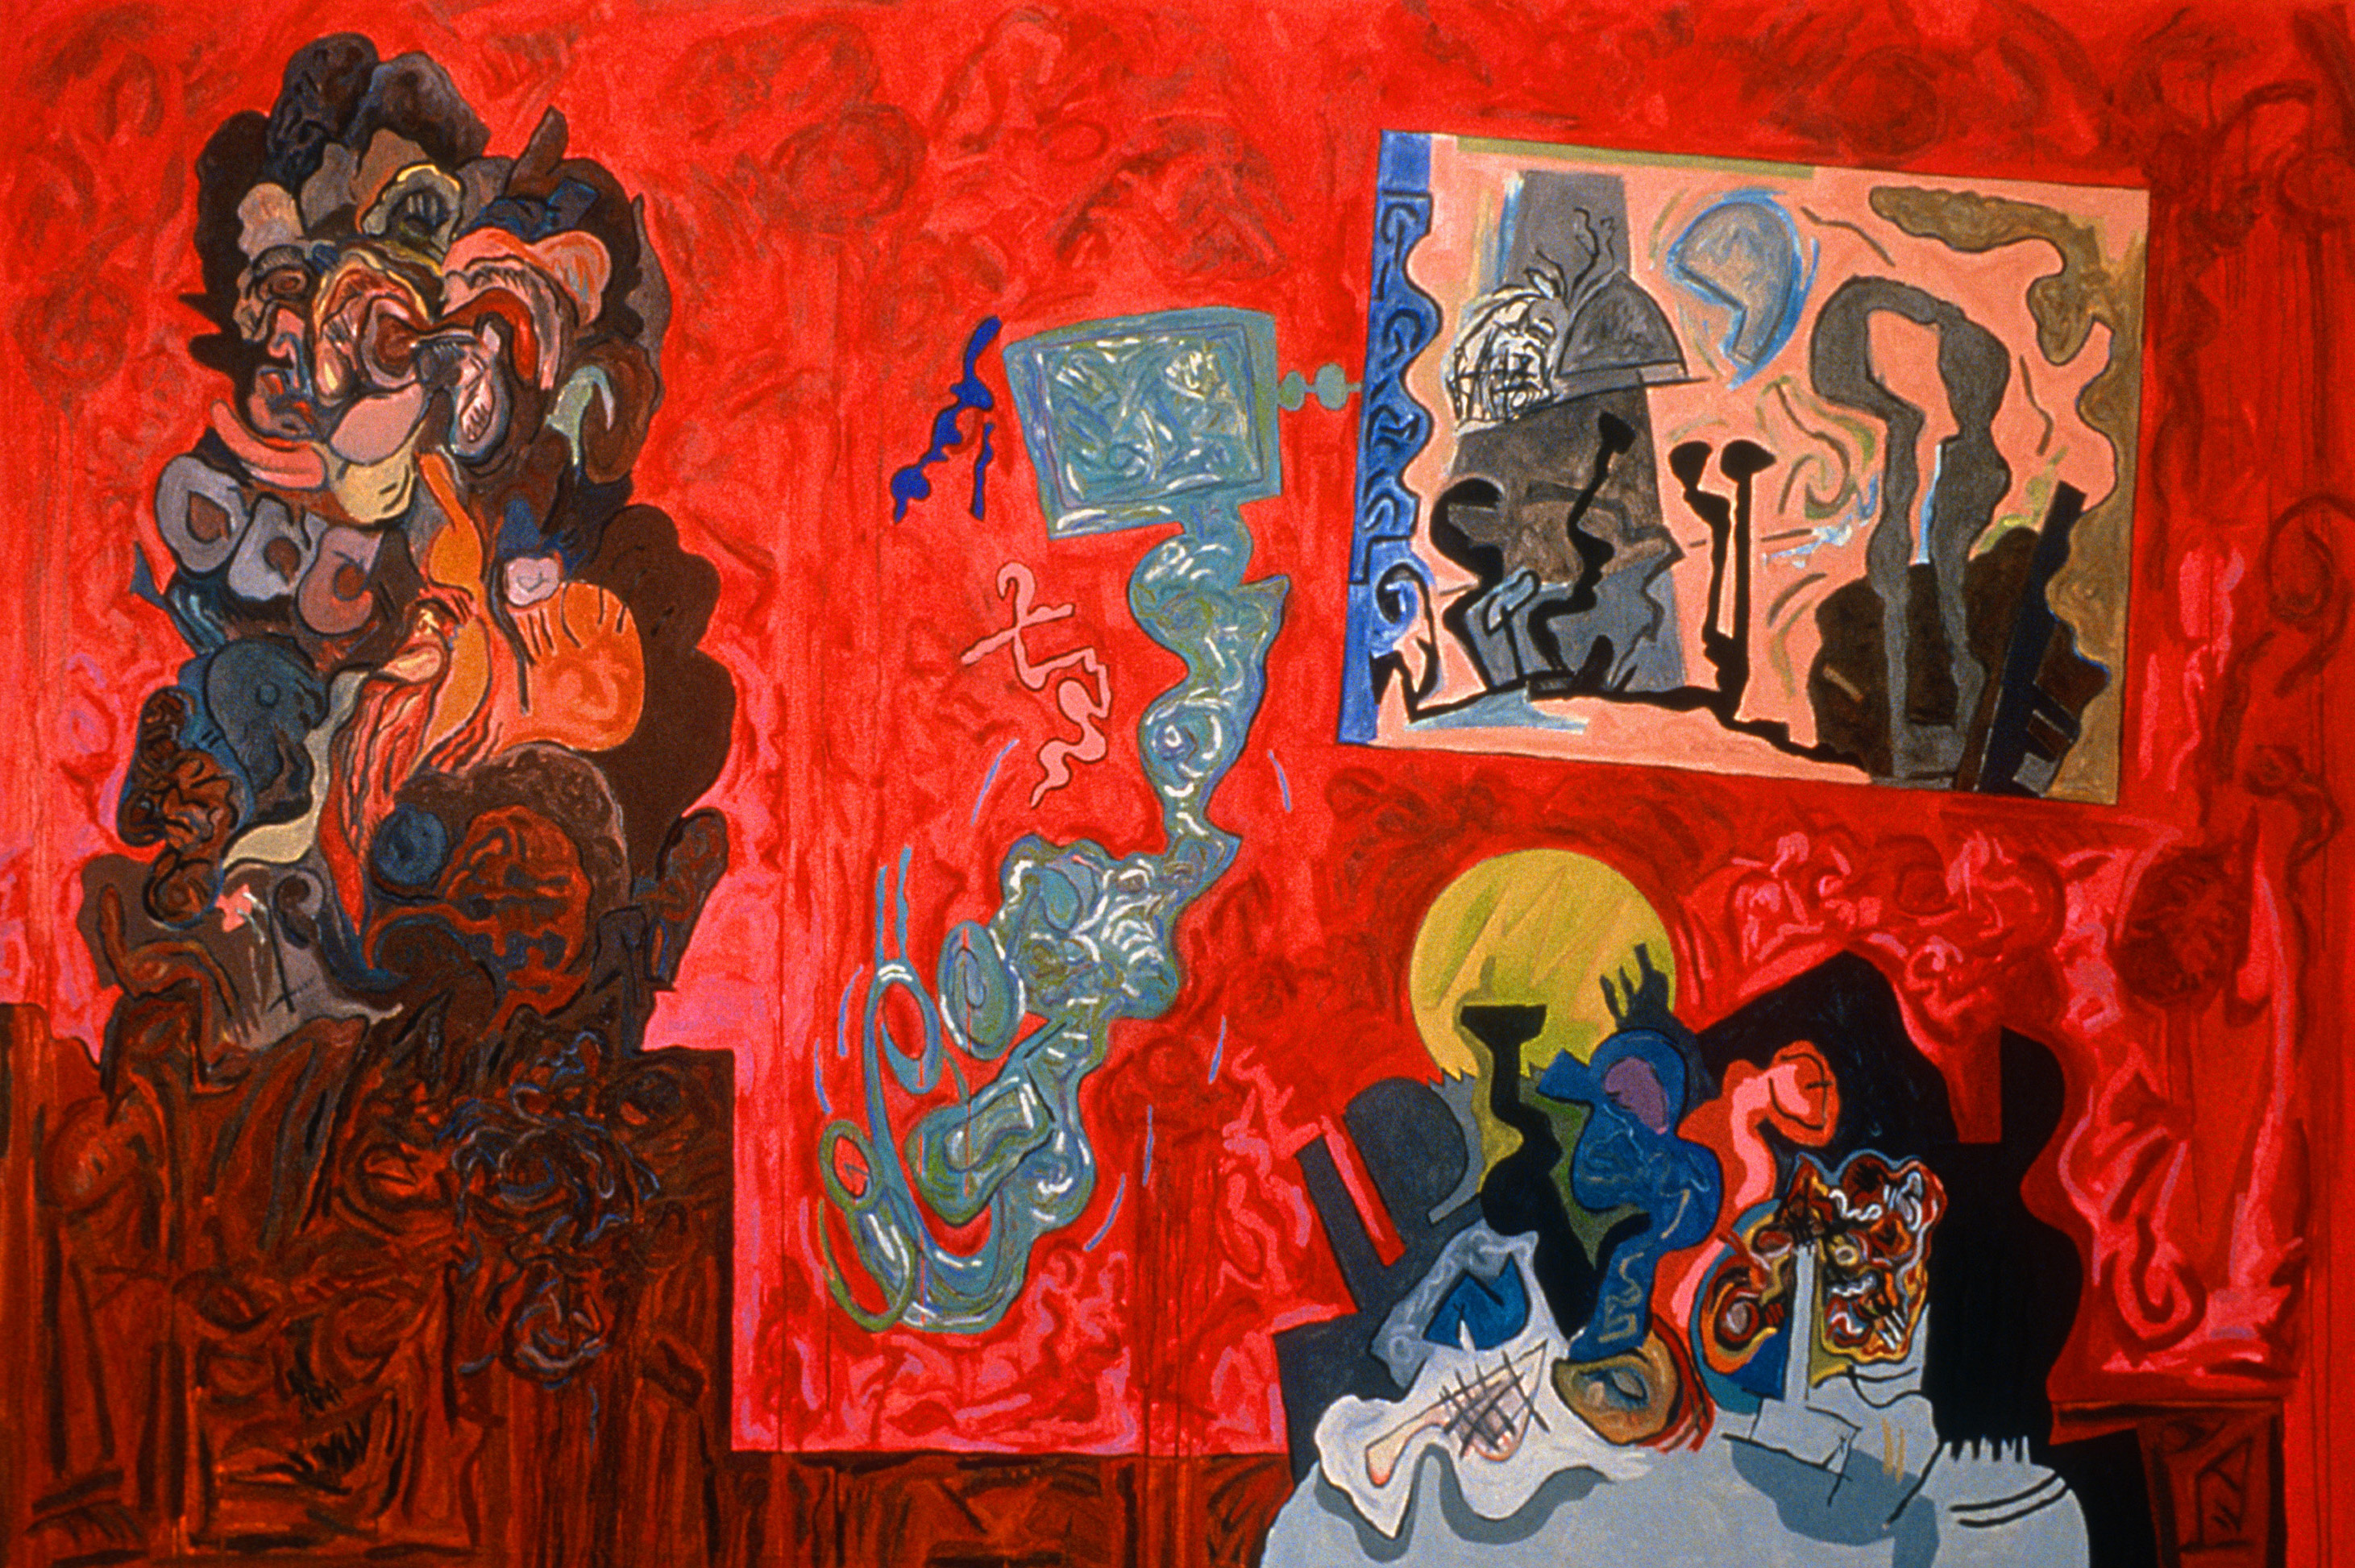 Make Believe No.5, 1988 | 78” x 116 ¼” | Oil & Acrylic on Canvas